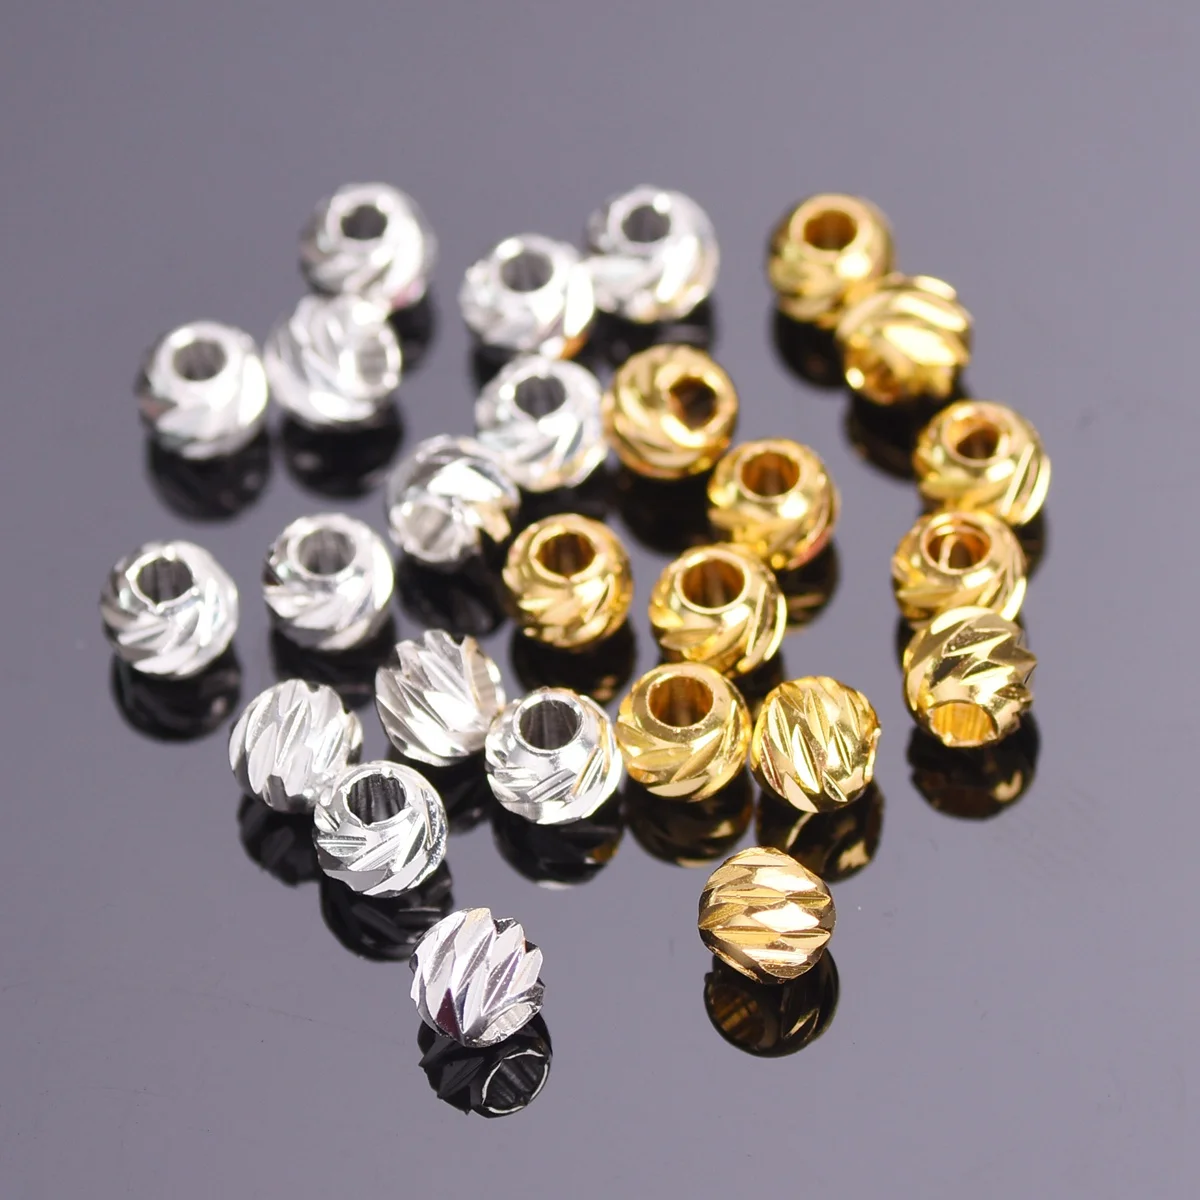 Round Carved 3mm 4mm 5mm 6mm 8mm Gold Color Silver Color Plated Brass Metal Loose Spacer Beads For Jewelry Making 5pcs round cylinder nepalese buddhist tibetan silver gold color metal loose beads for jewelry making diy bracelet